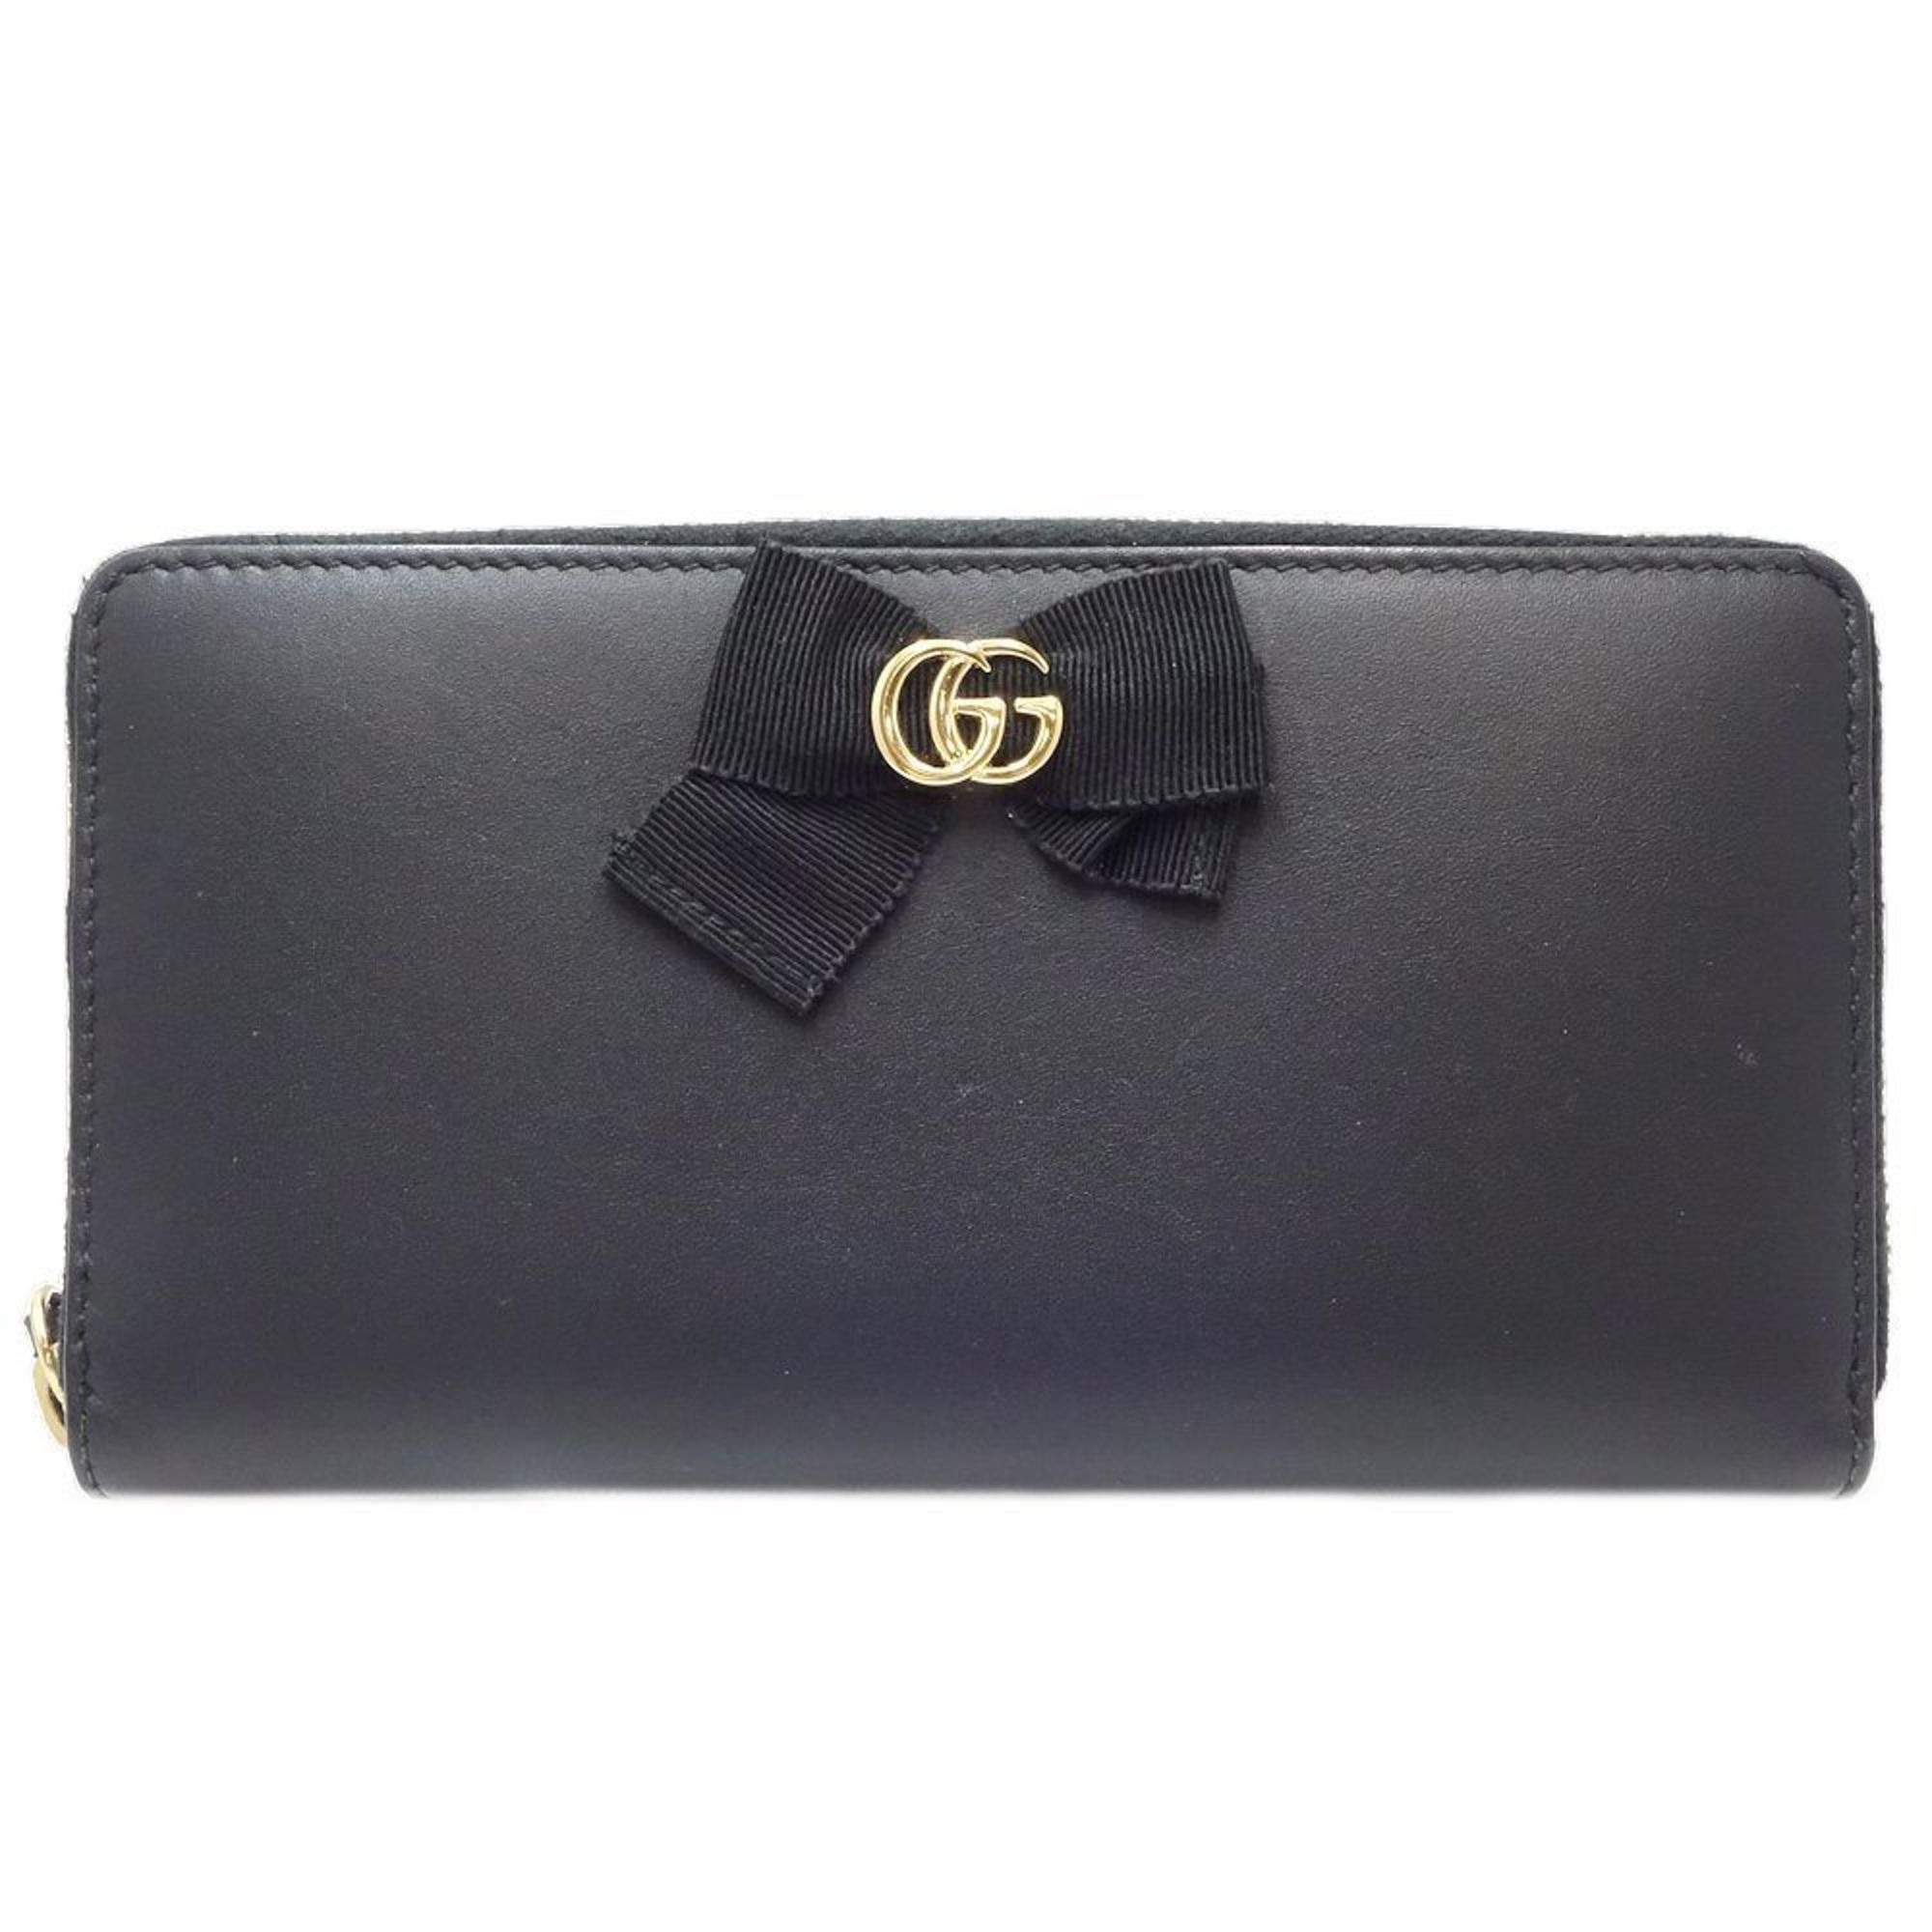 GUCCI Gucci Round Zipper 453819 Long Wallet GG Marmont Leather Black 083877